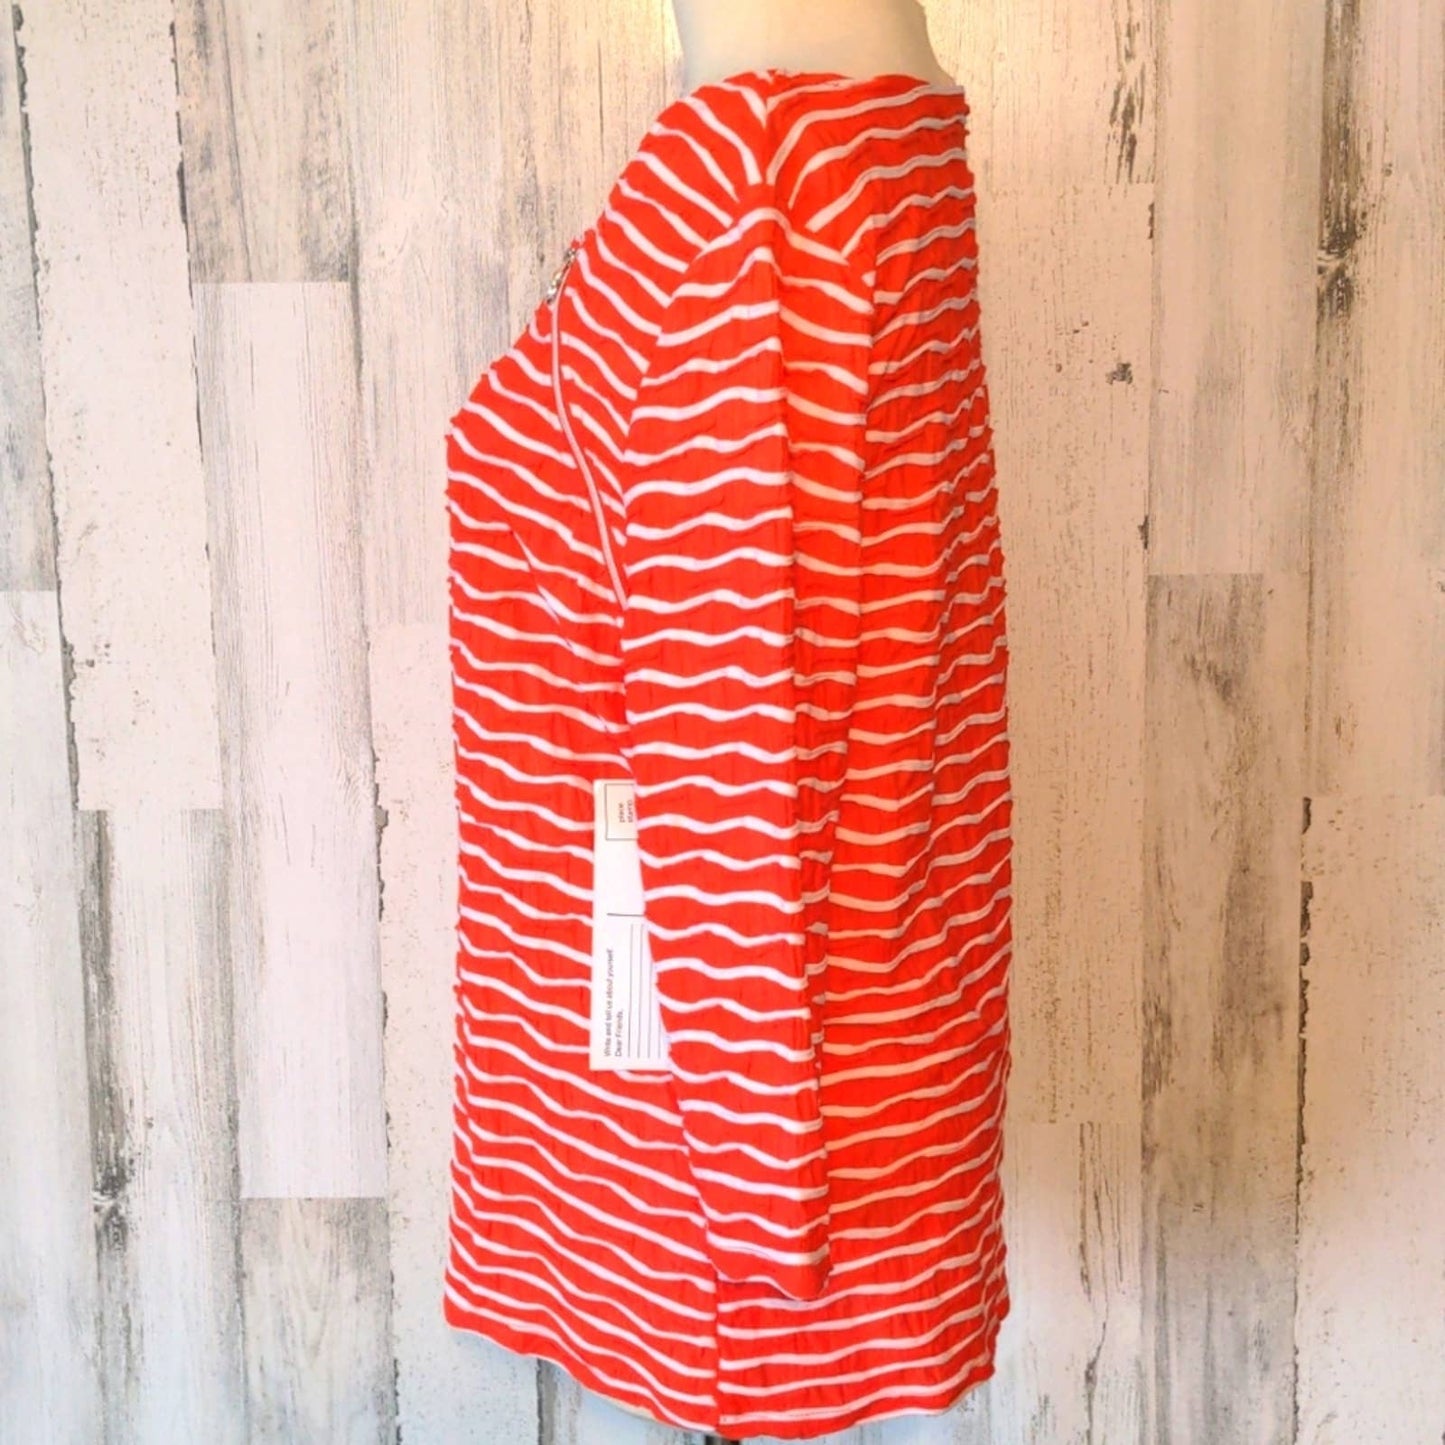 ONQUE CASUAL Orange Striped Textured Zipper Top Large NEW